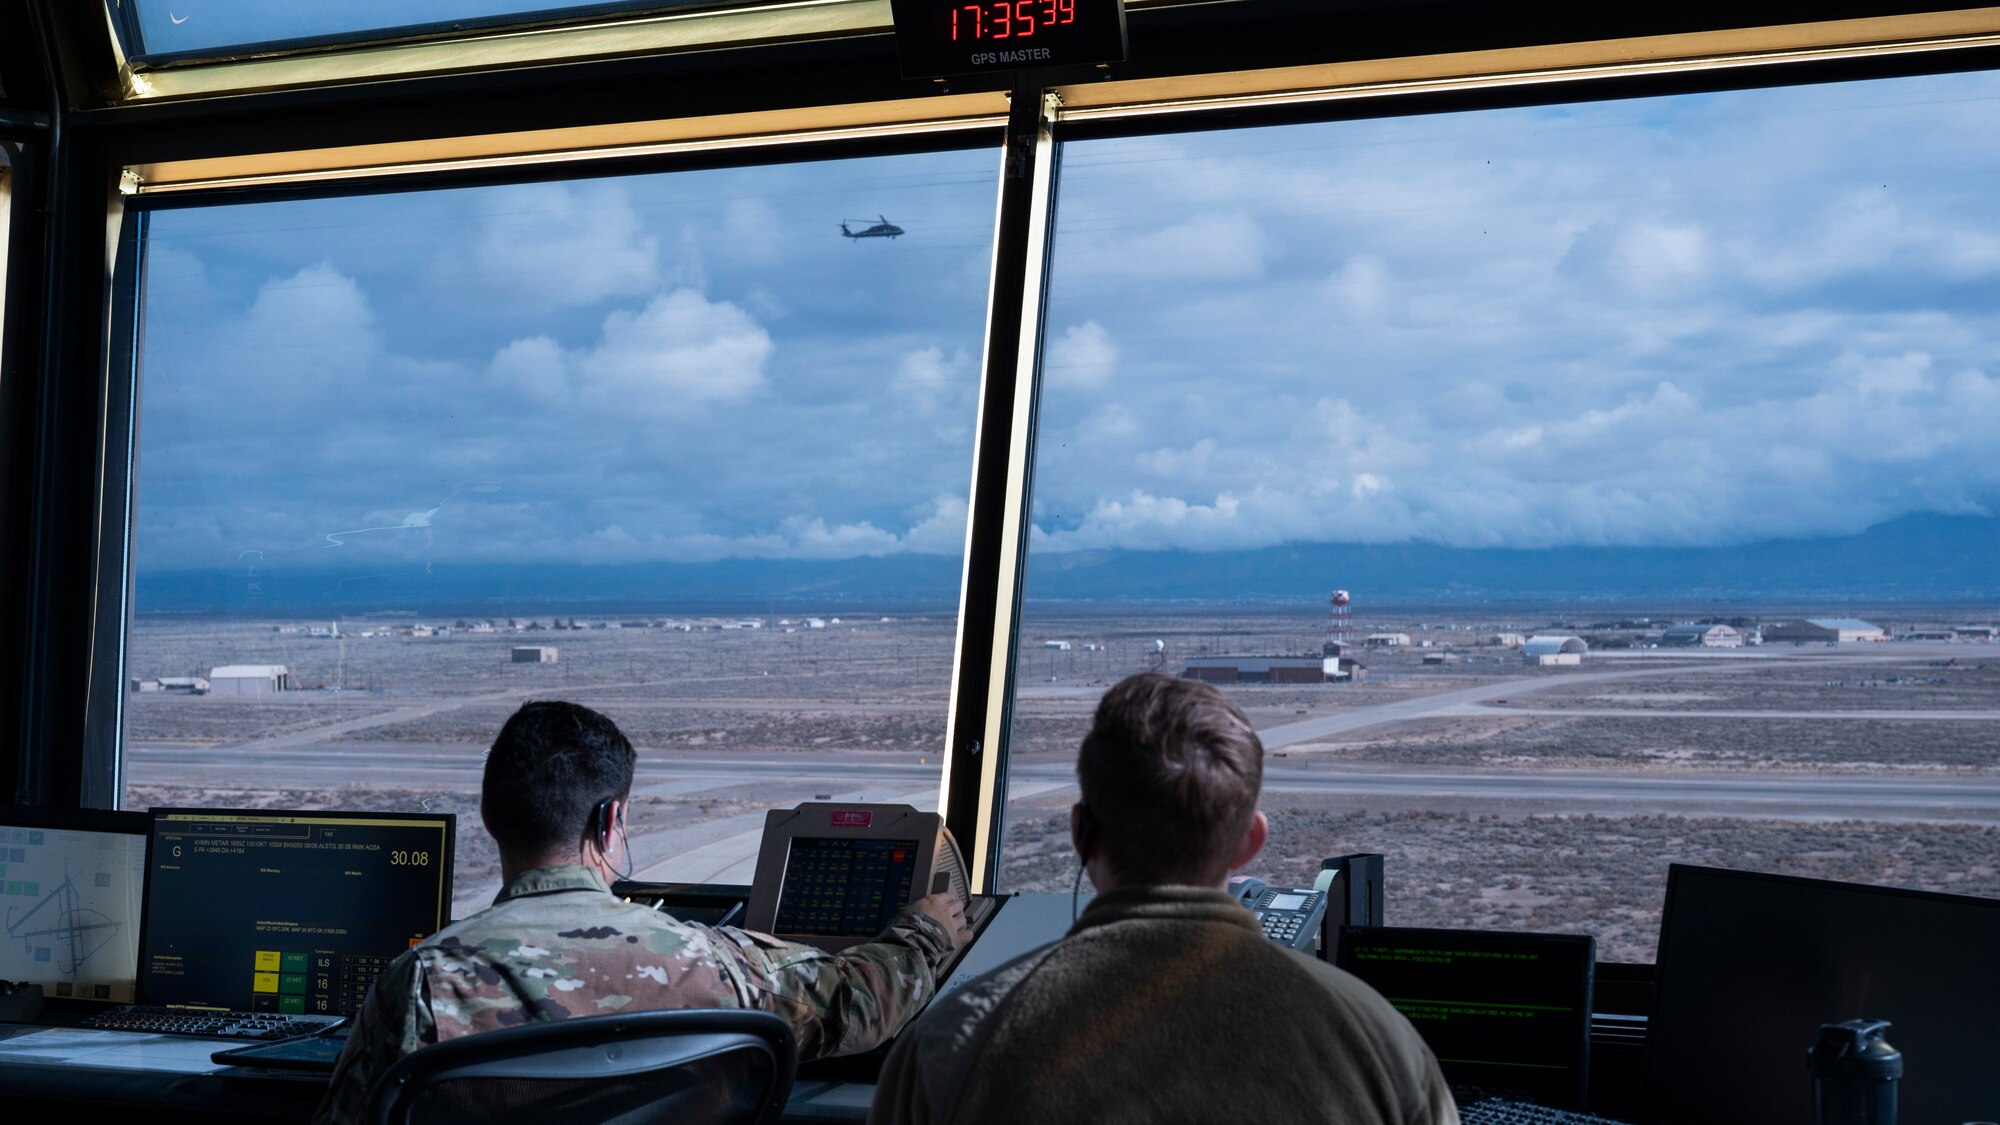 Airmen from the 54th Operations Support Squadron, monitor taxiway activity from the air traffic tower, at Holloman Air Force Base, New Mexico, Jan. 24, 2024. ATC Airmen play a significant role in communicating fight patterns, weather information and are responsible for clearing pilots during take-off and landing. (U.S. Air Force photo by Airman 1st Class Michelle Ferrari)